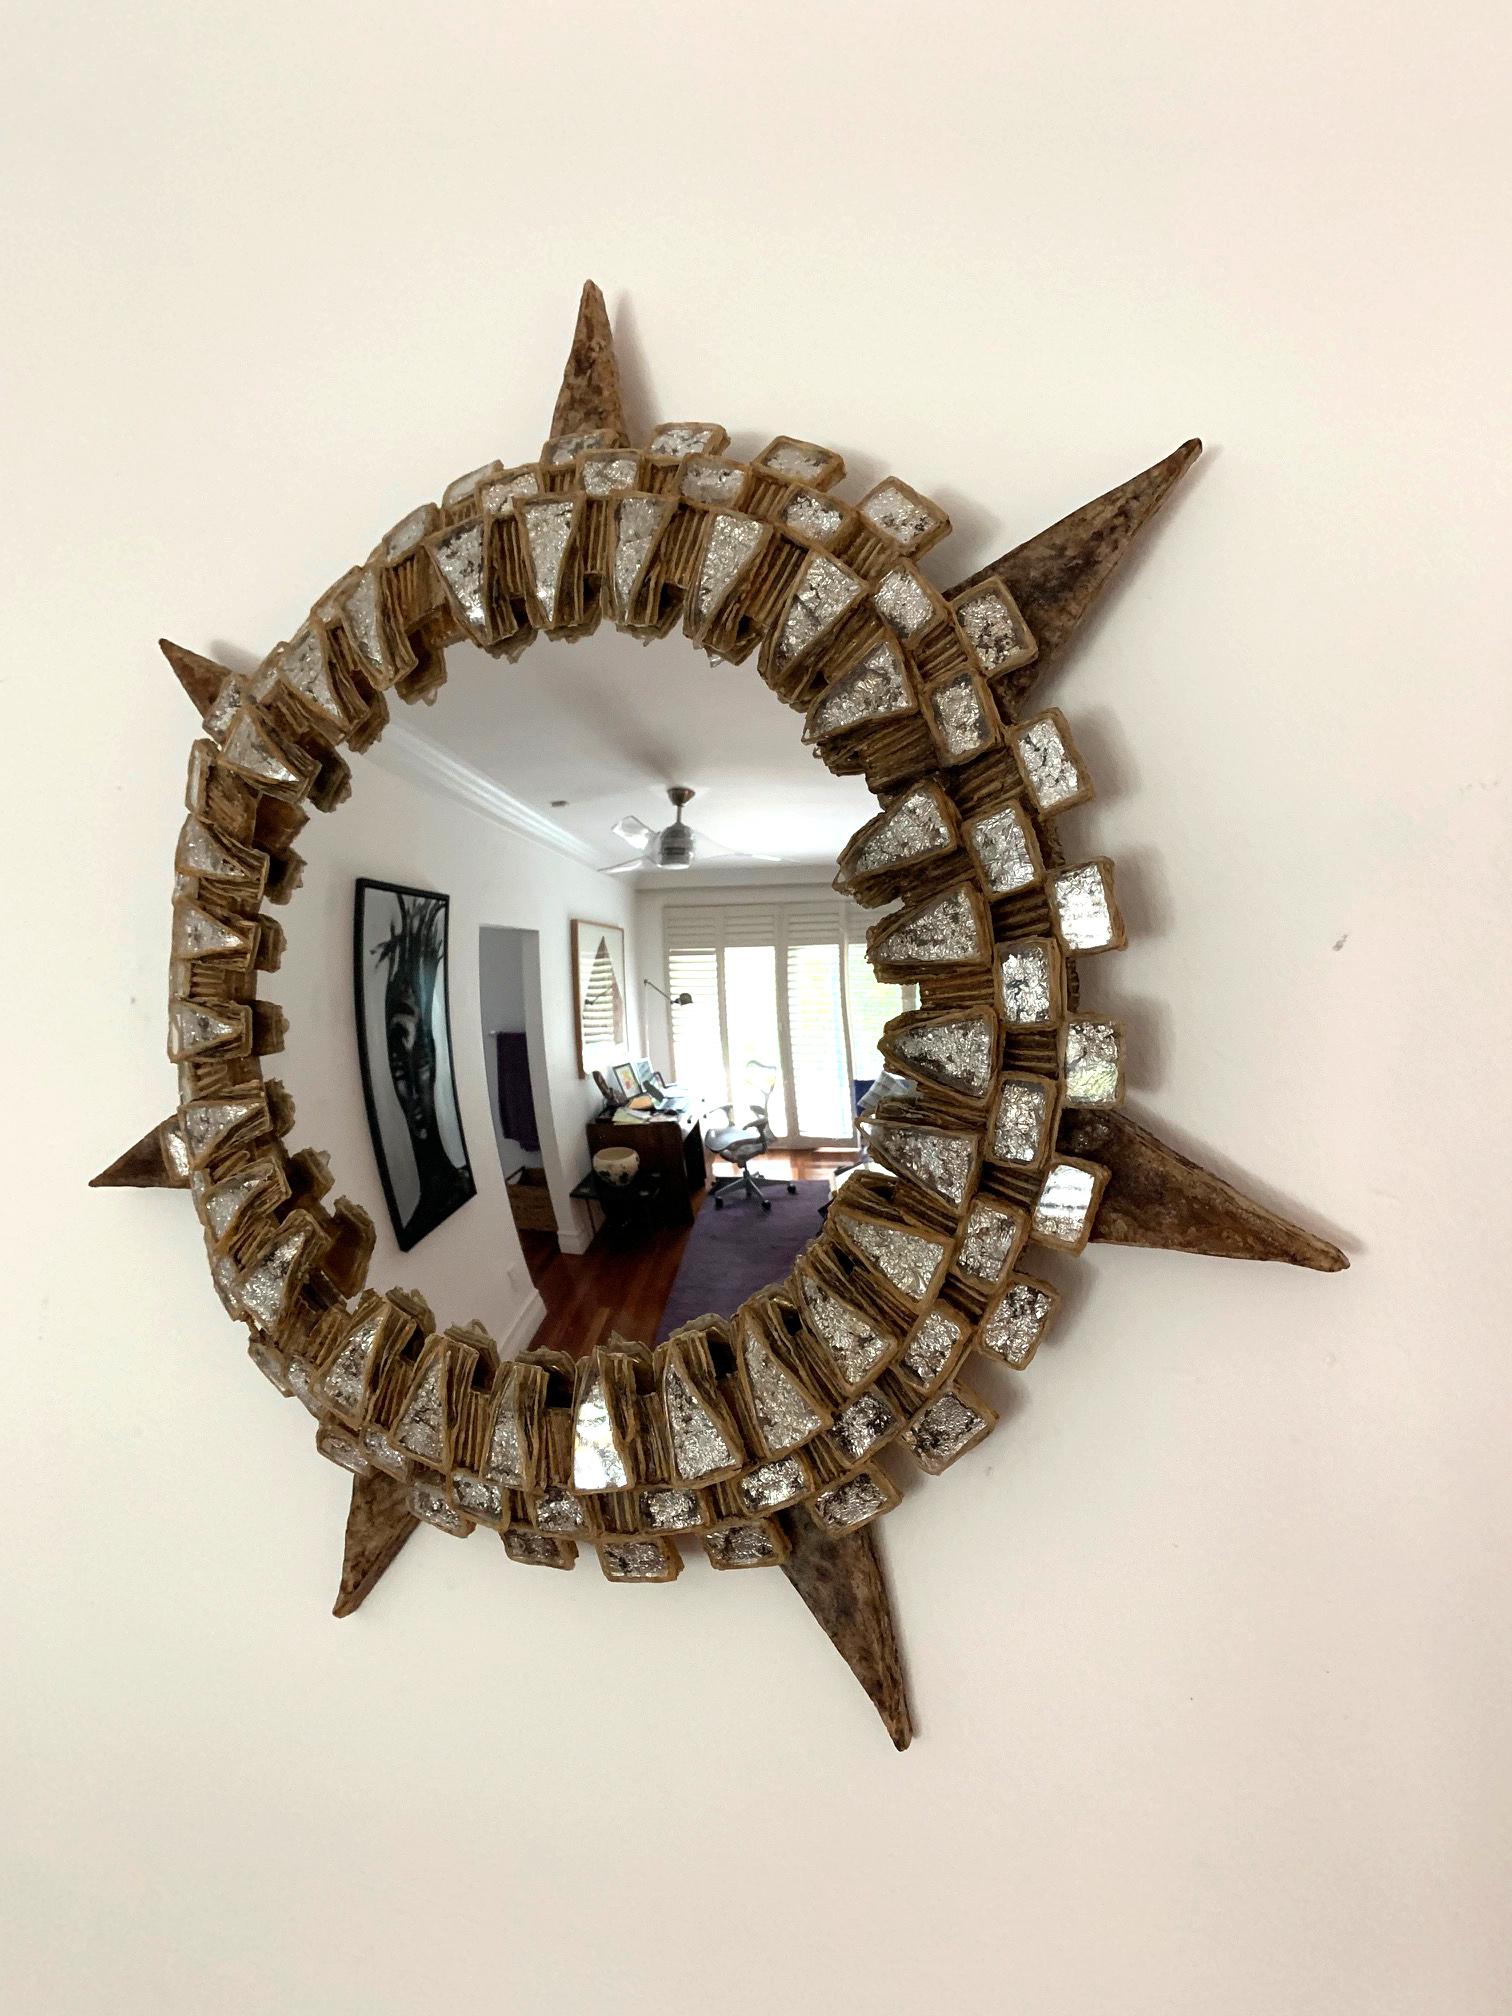 Large French Tudor Wall Mirror by Line Vautrin In Good Condition For Sale In Atlanta, GA